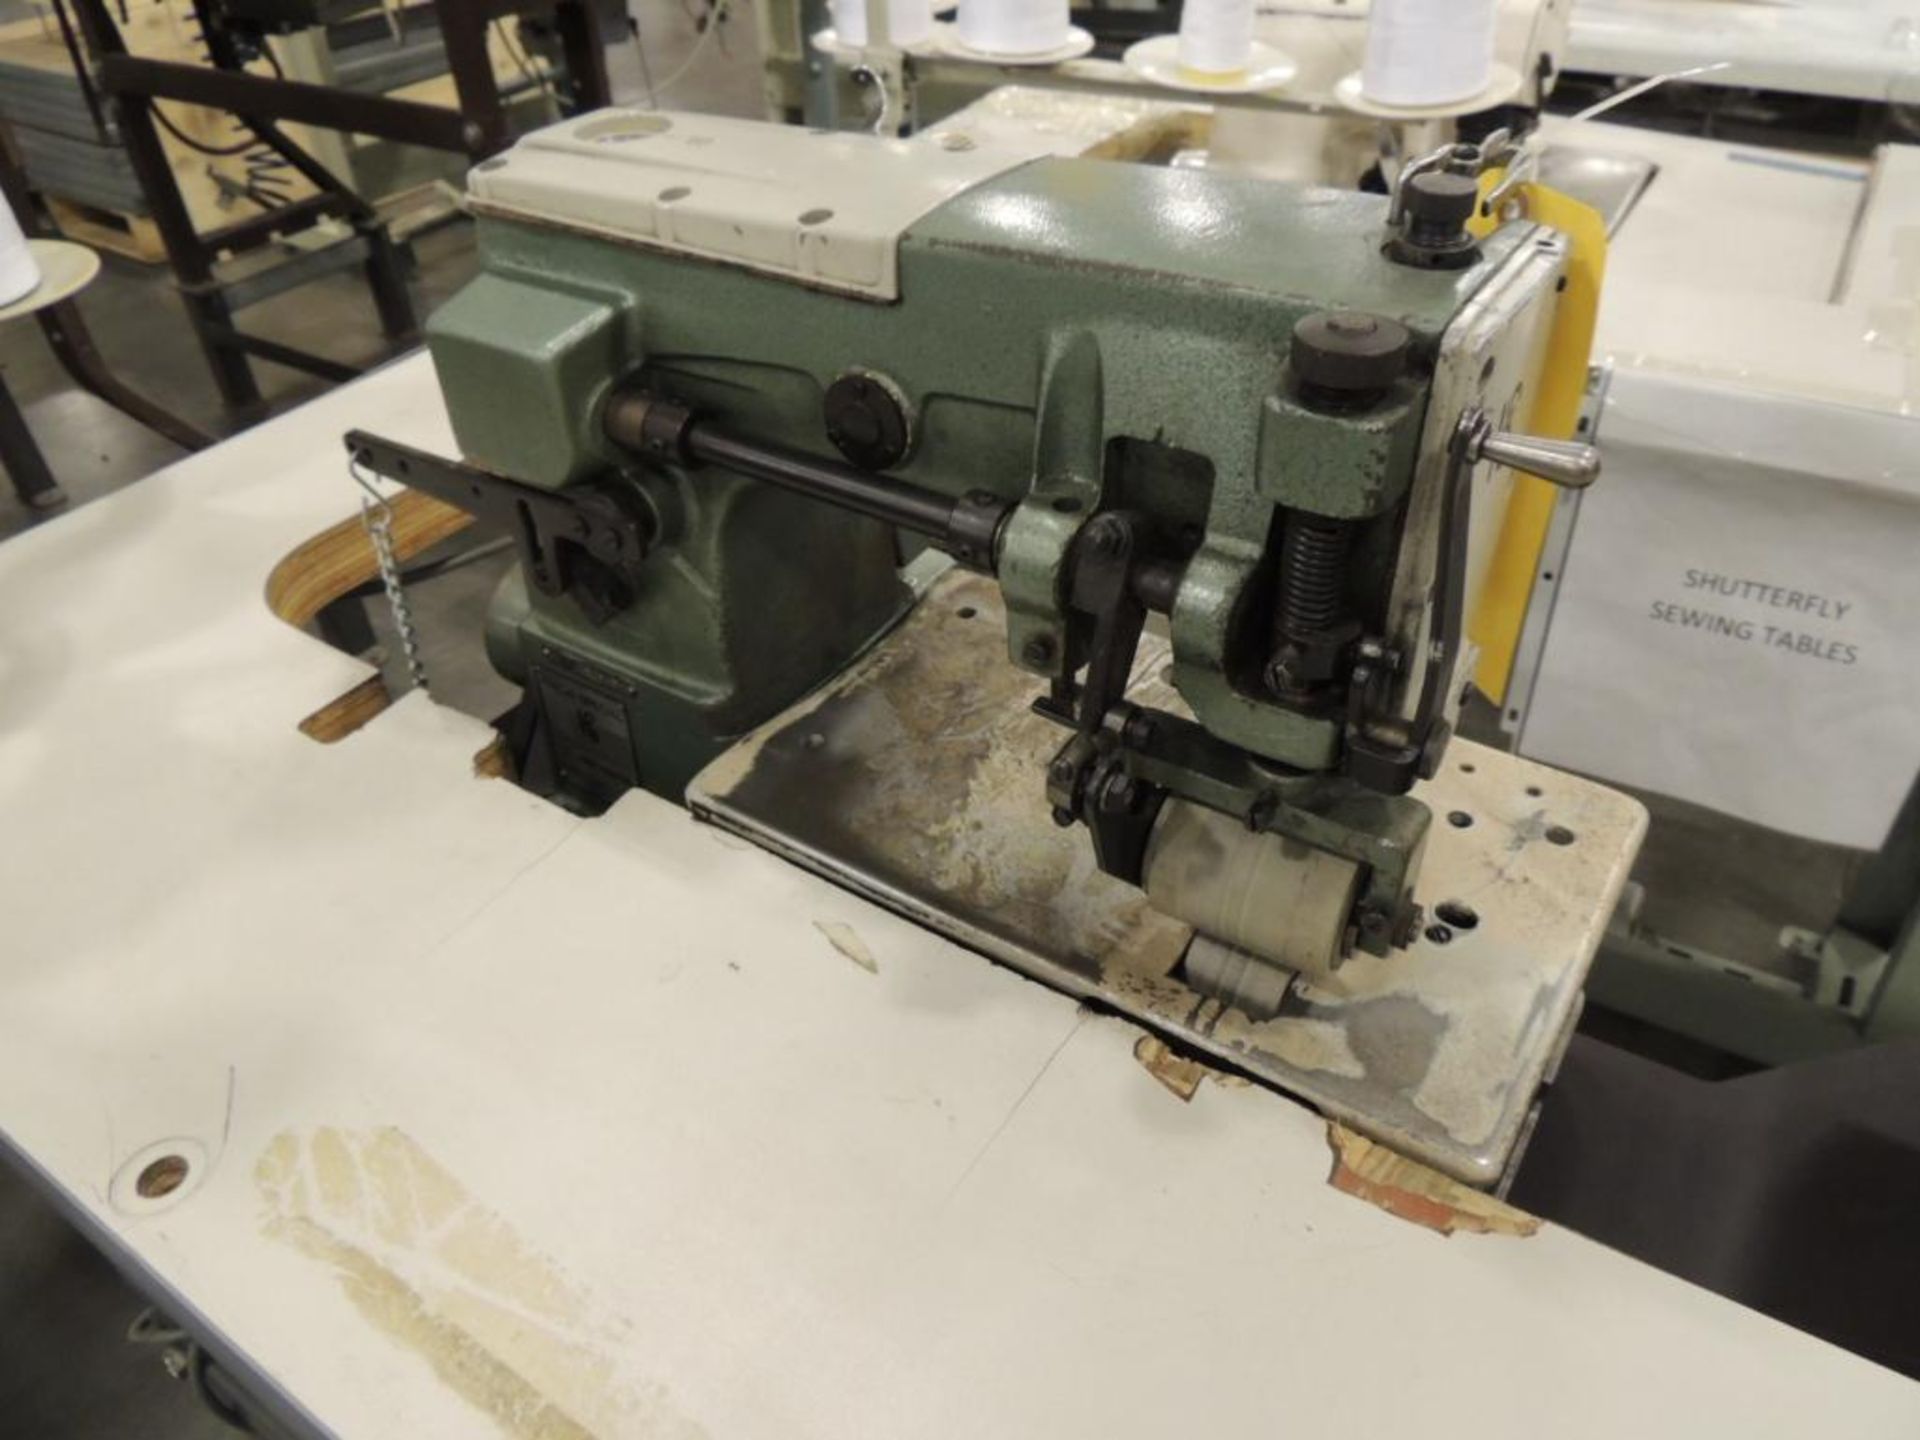 Kansai Special DLR-1502 PHD 2-Needle, 5-Thread Sewing Machine, on Table - Image 2 of 3